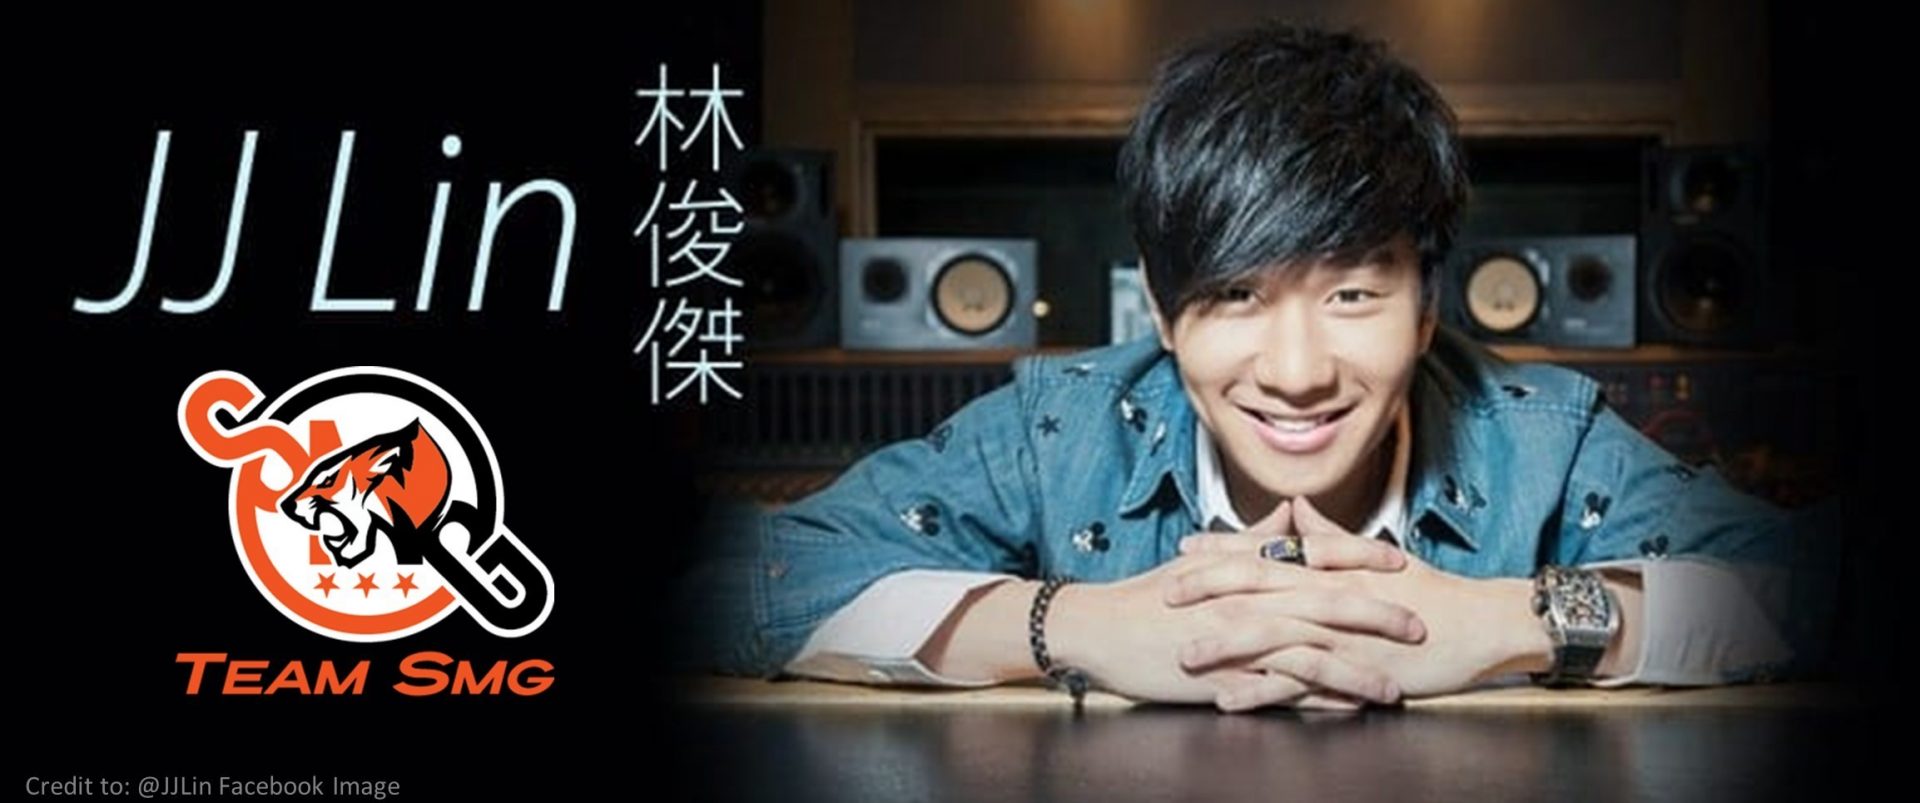 JJ Lin’s Singapore Esports team to make competitive debut in July